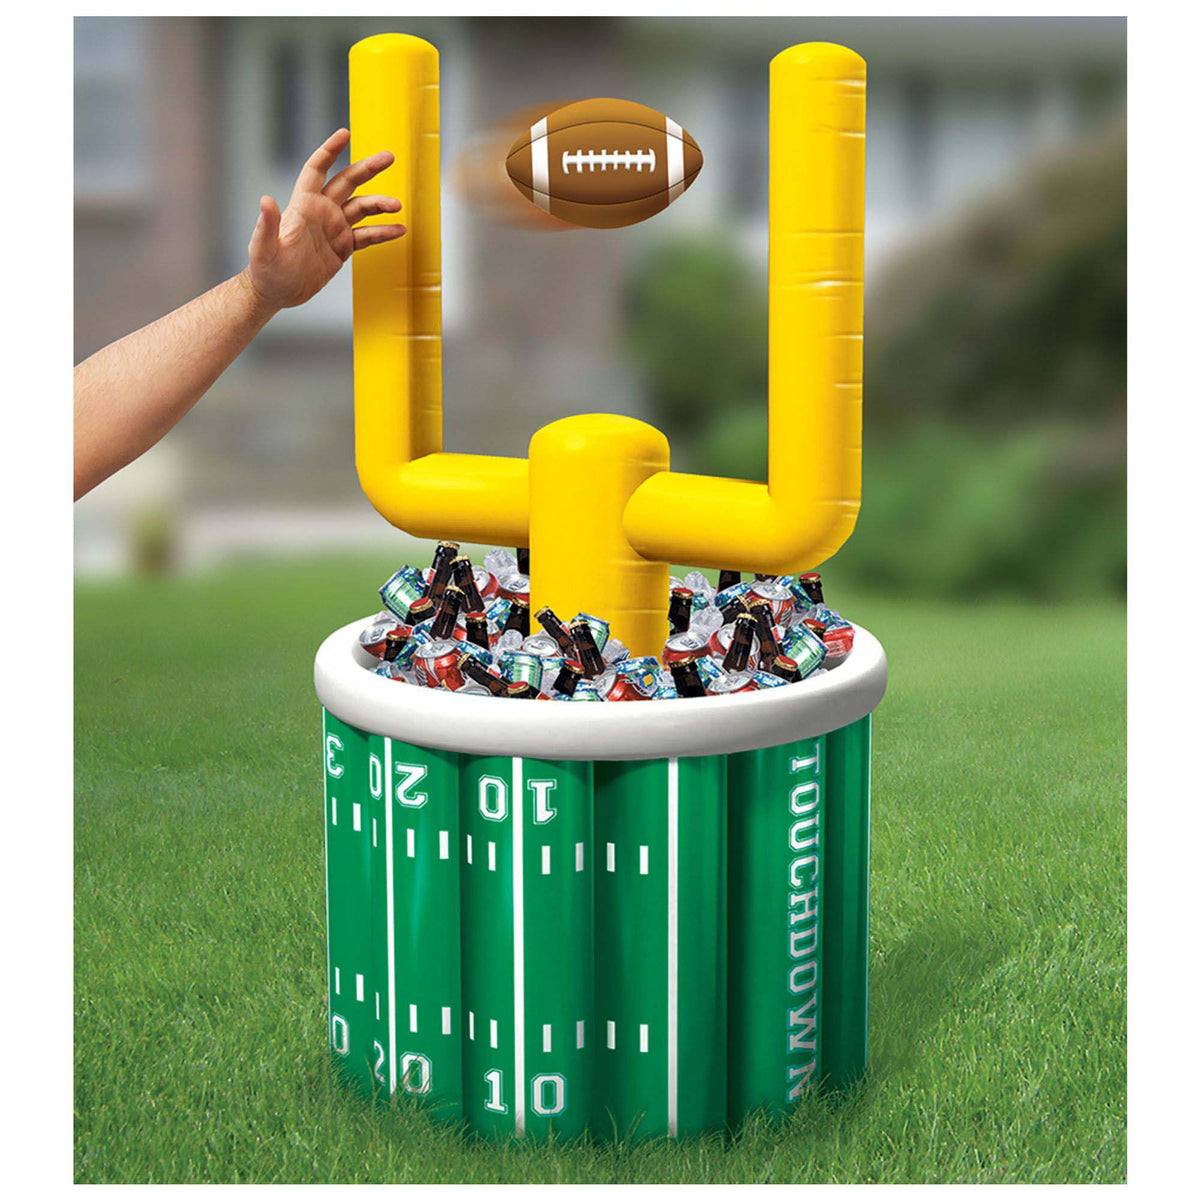 AMSCAN CA Superbowl NFL Super Bowl Party Jumbo Inflatable Cooler, 1 Count